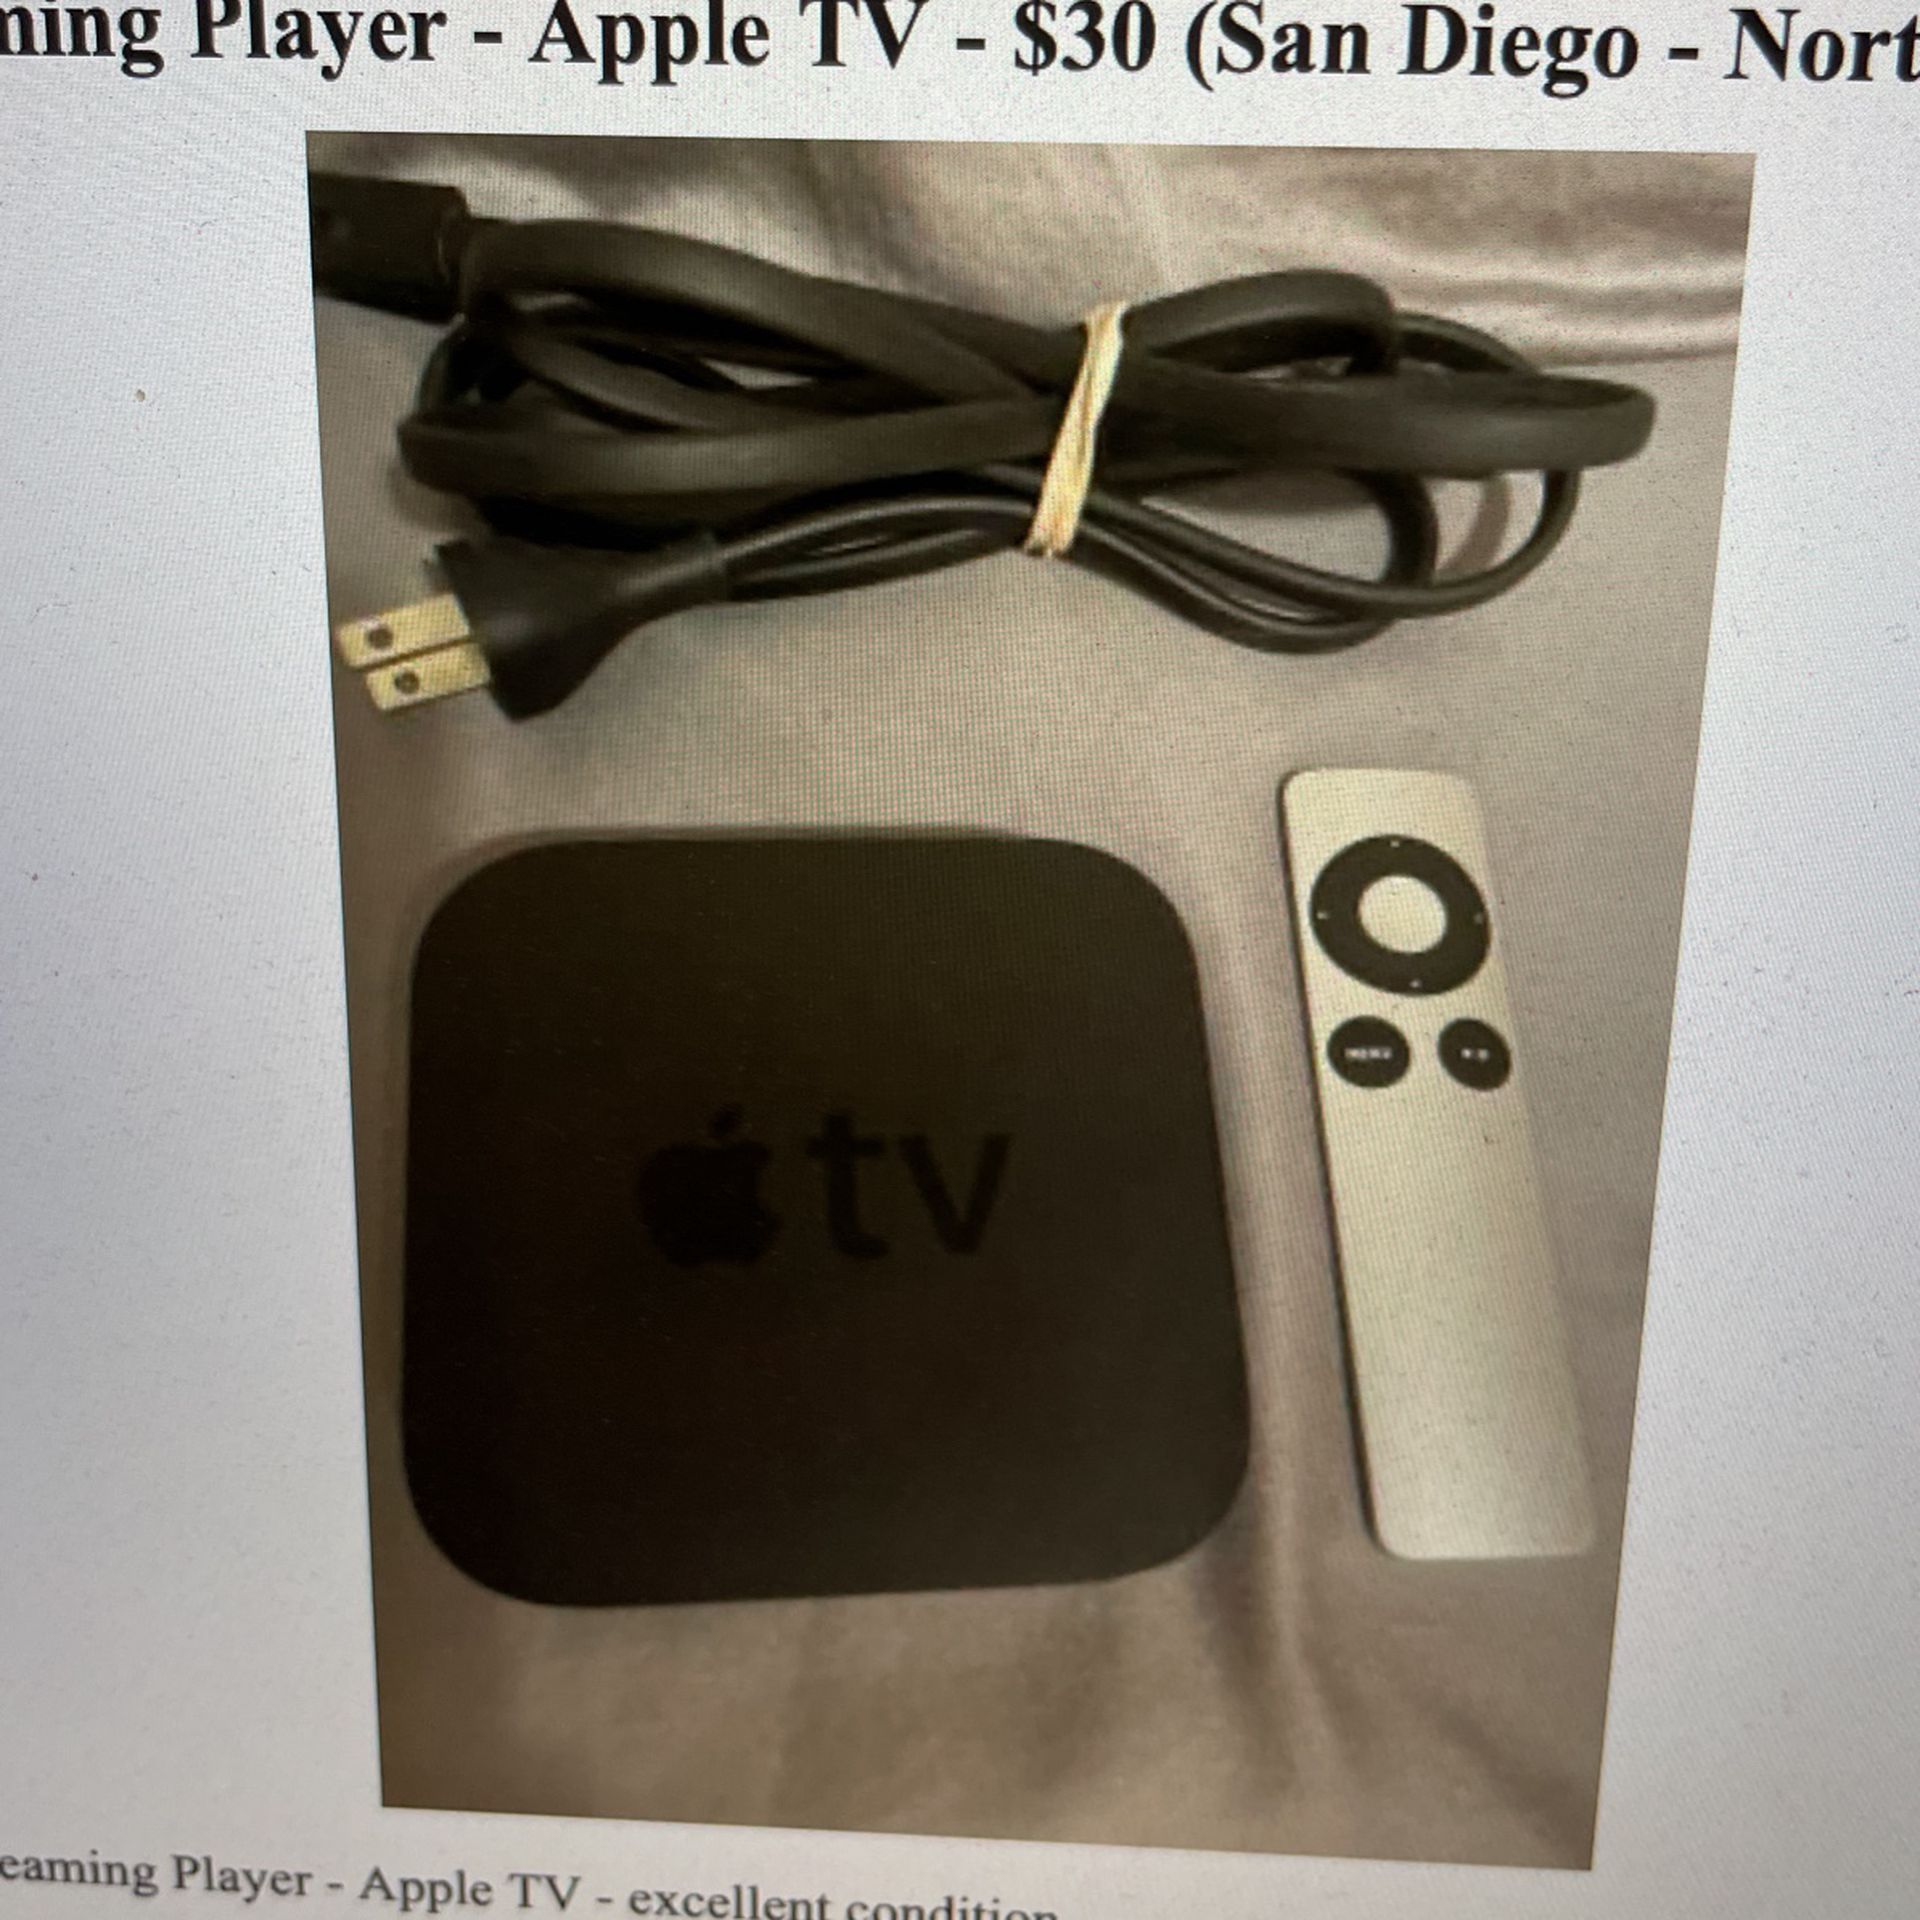 Streaming Player - Apple TV 